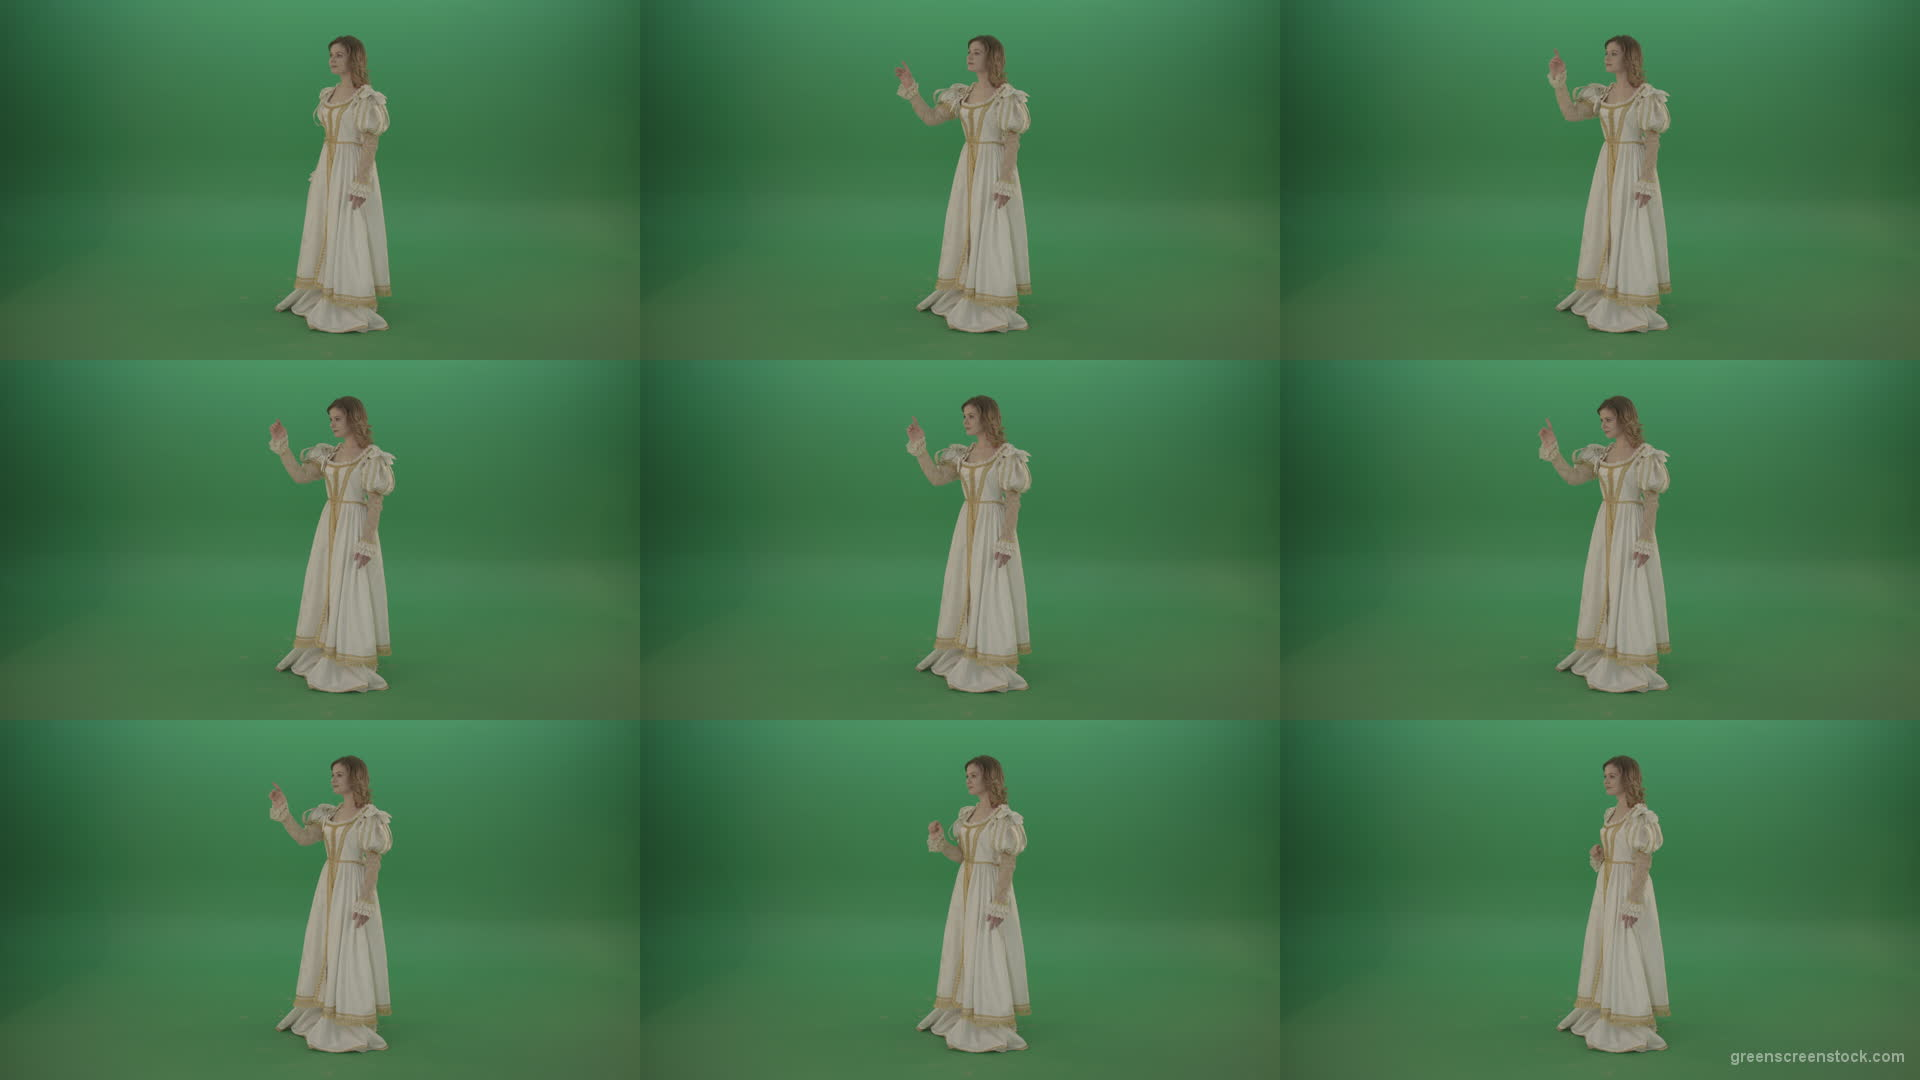 Finding-a-girl-on-the-touch-screen-is-looking-at-the-photo-with-pleasure-isolated-on-green-screen Green Screen Stock